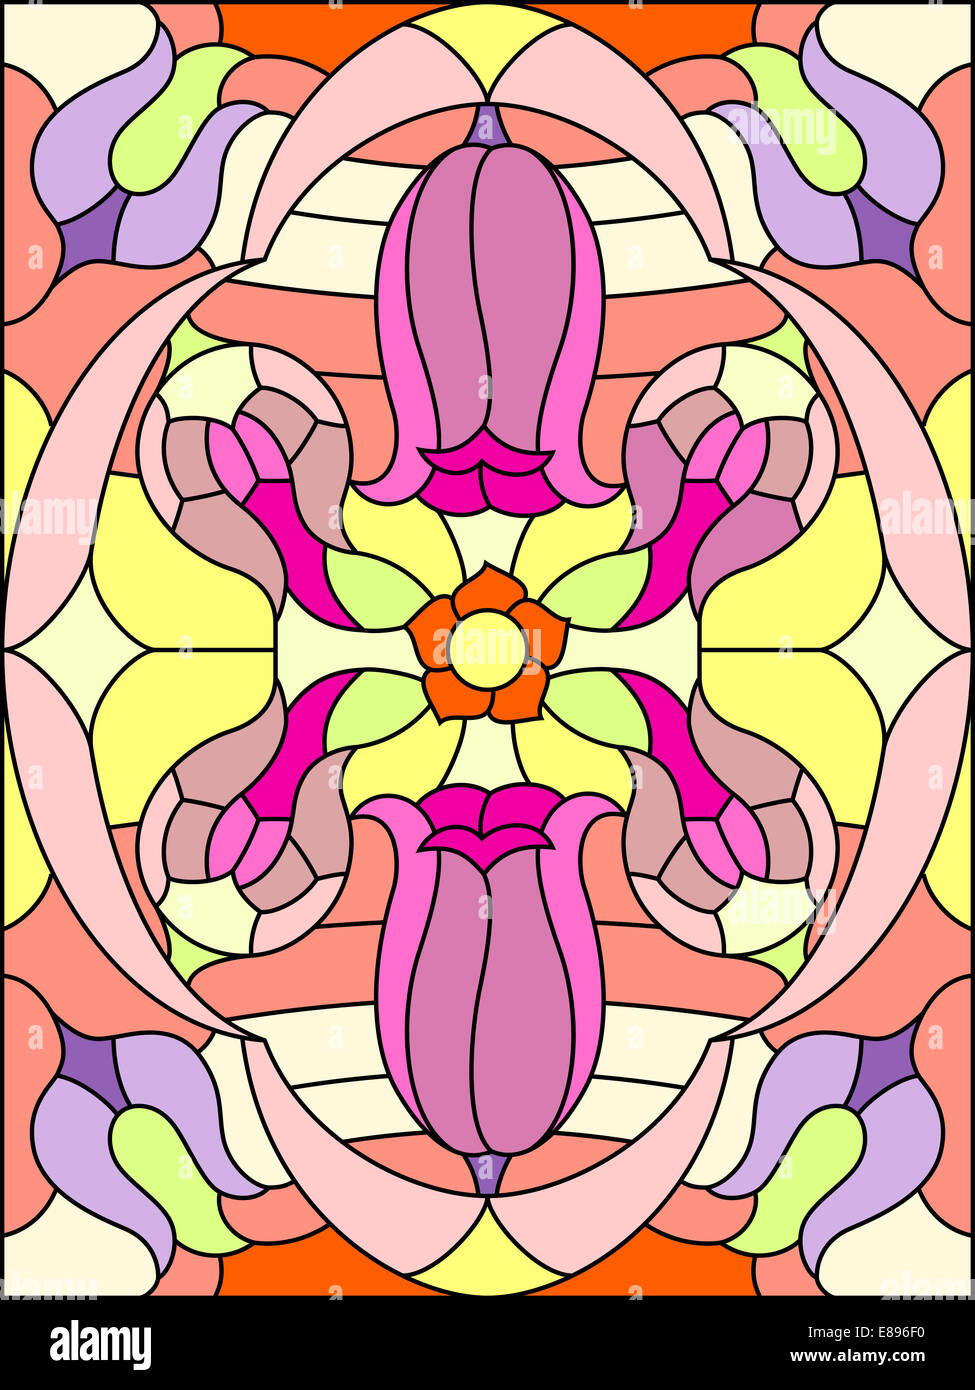 Flowers composition. Floral pattern for stained glass window. Stock Photo